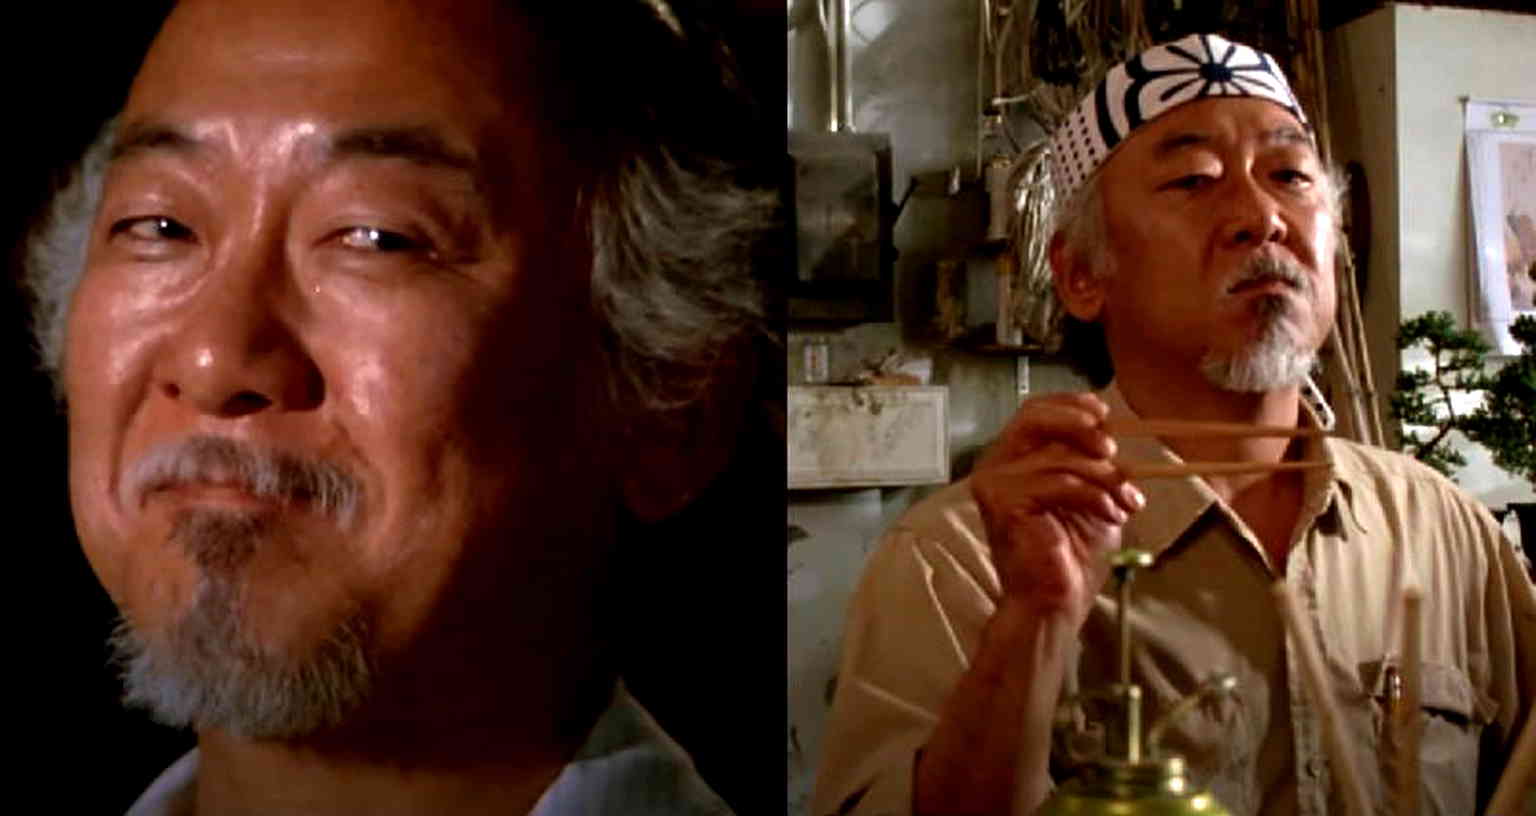 Documentary on Iconic Actor Pat Morita Explores His Struggles With Depression